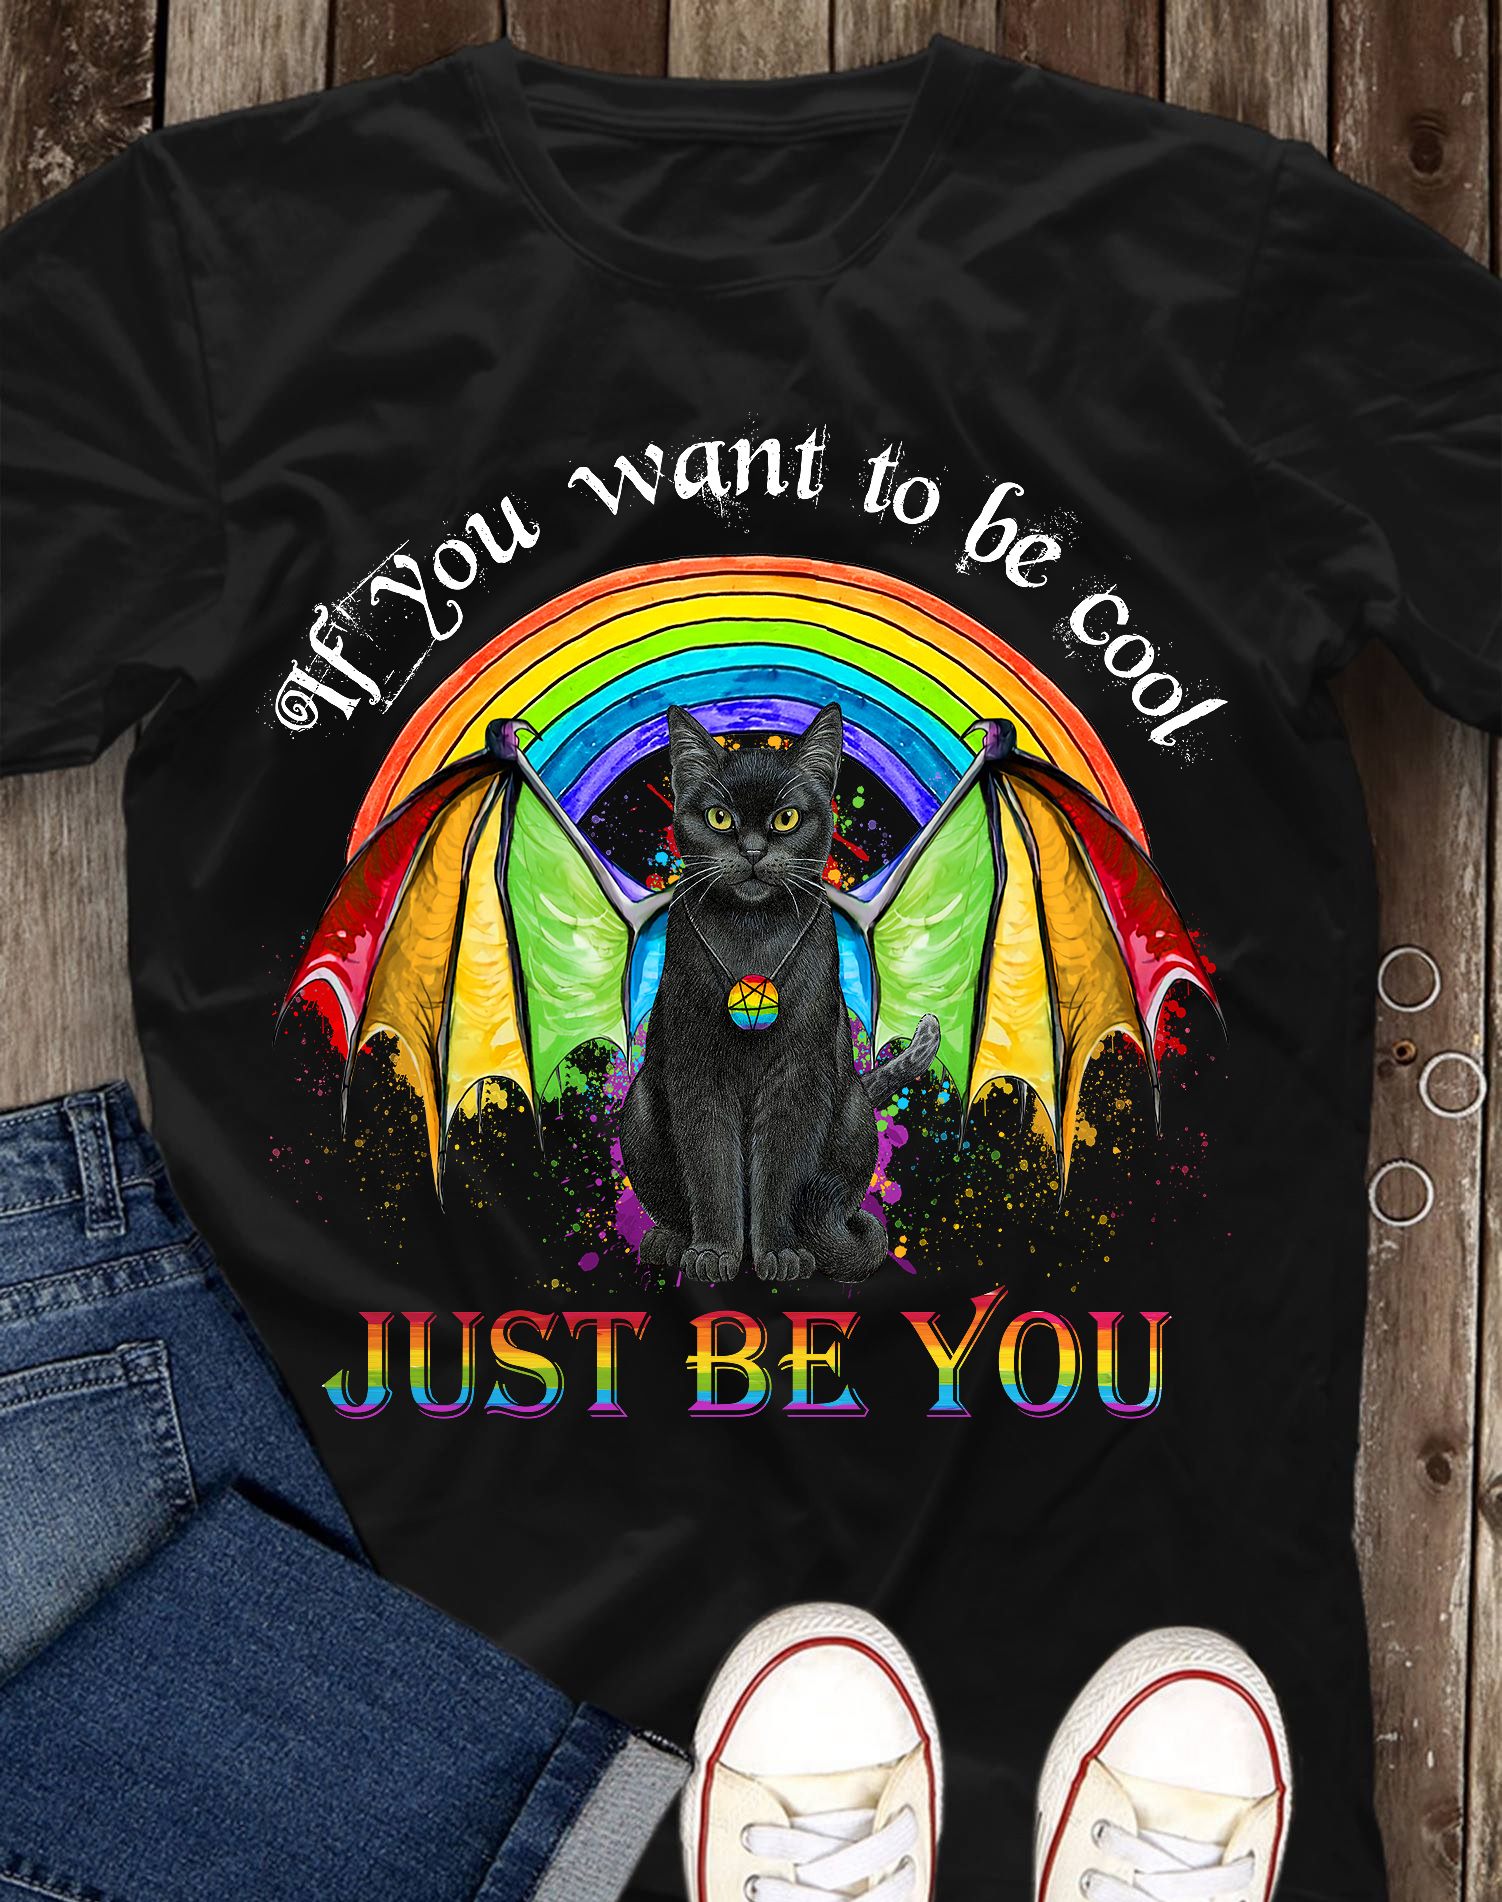 If you want to be cool just be you - Cat with wings - LGBT community